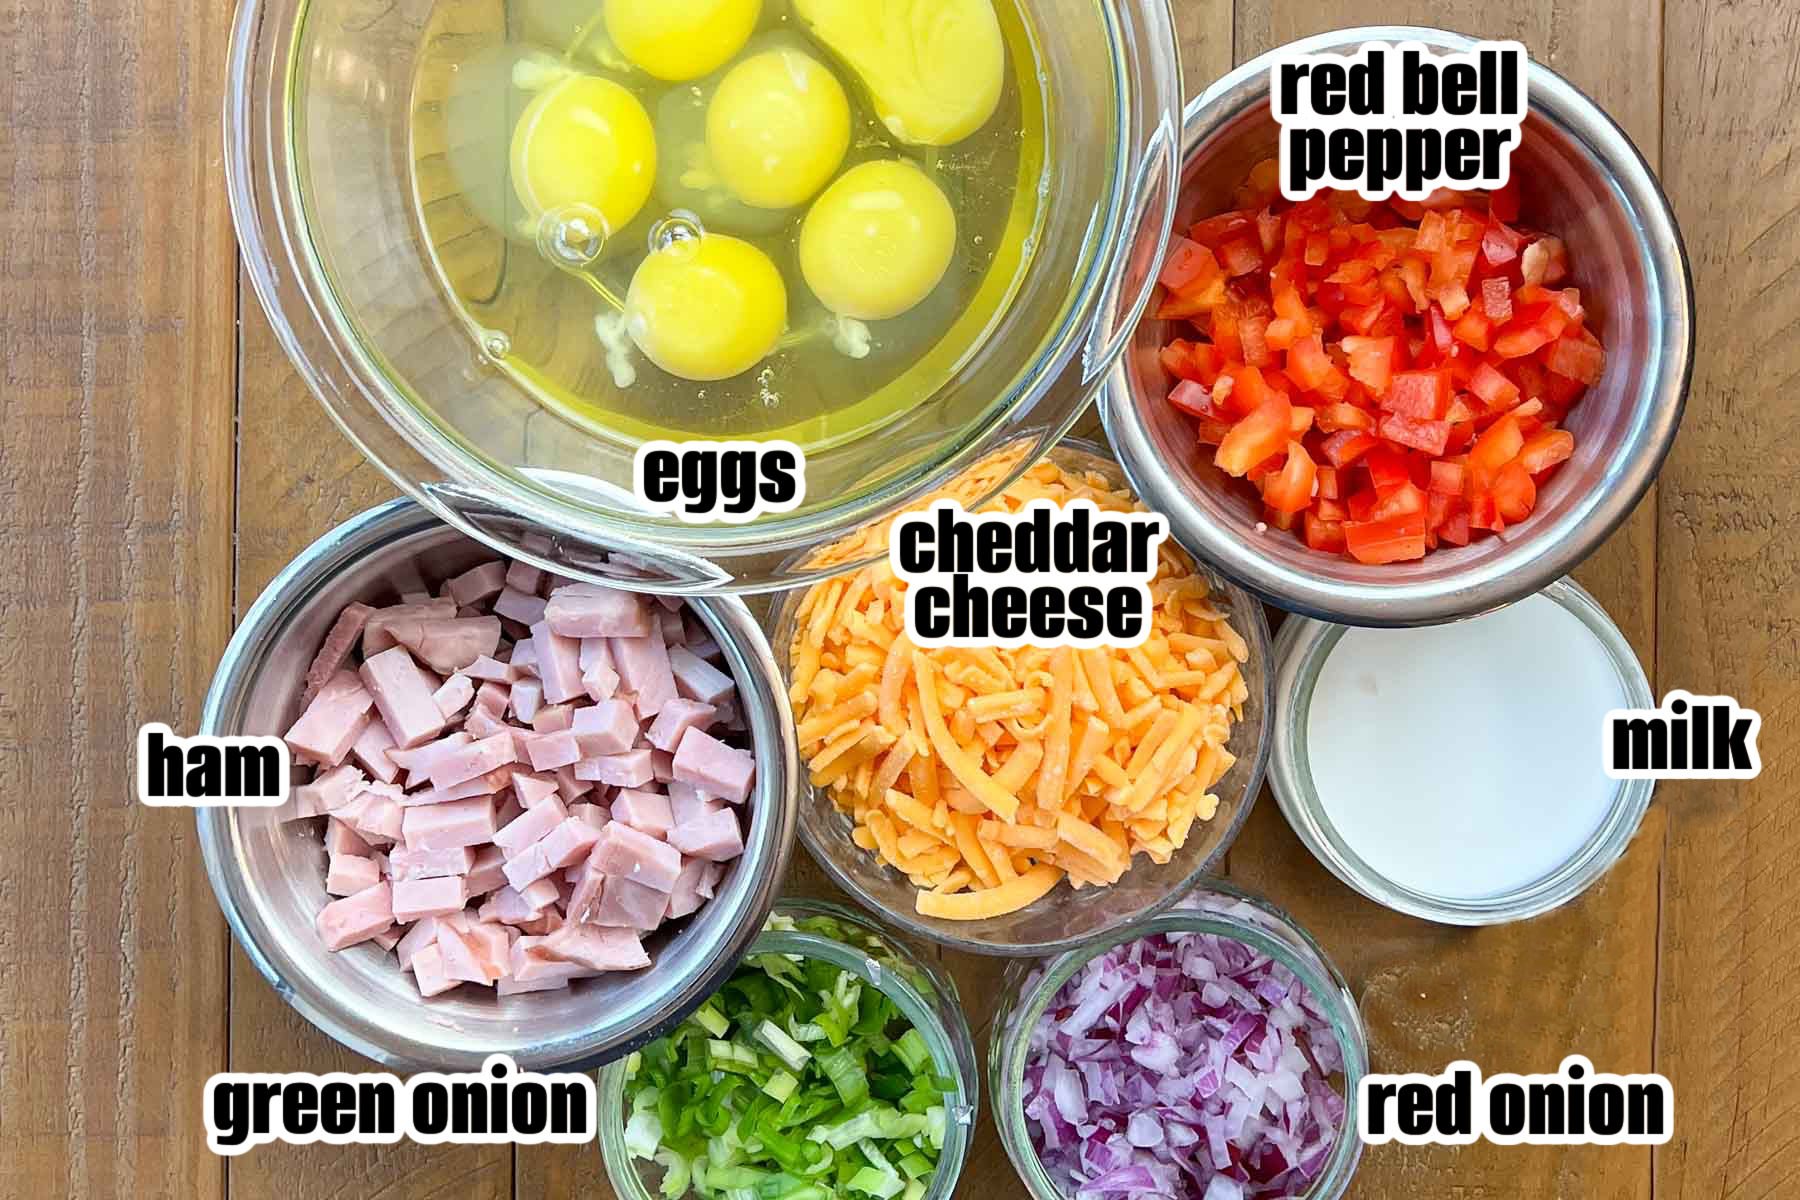 Ingredients in measuring bowls for making egg muffins.